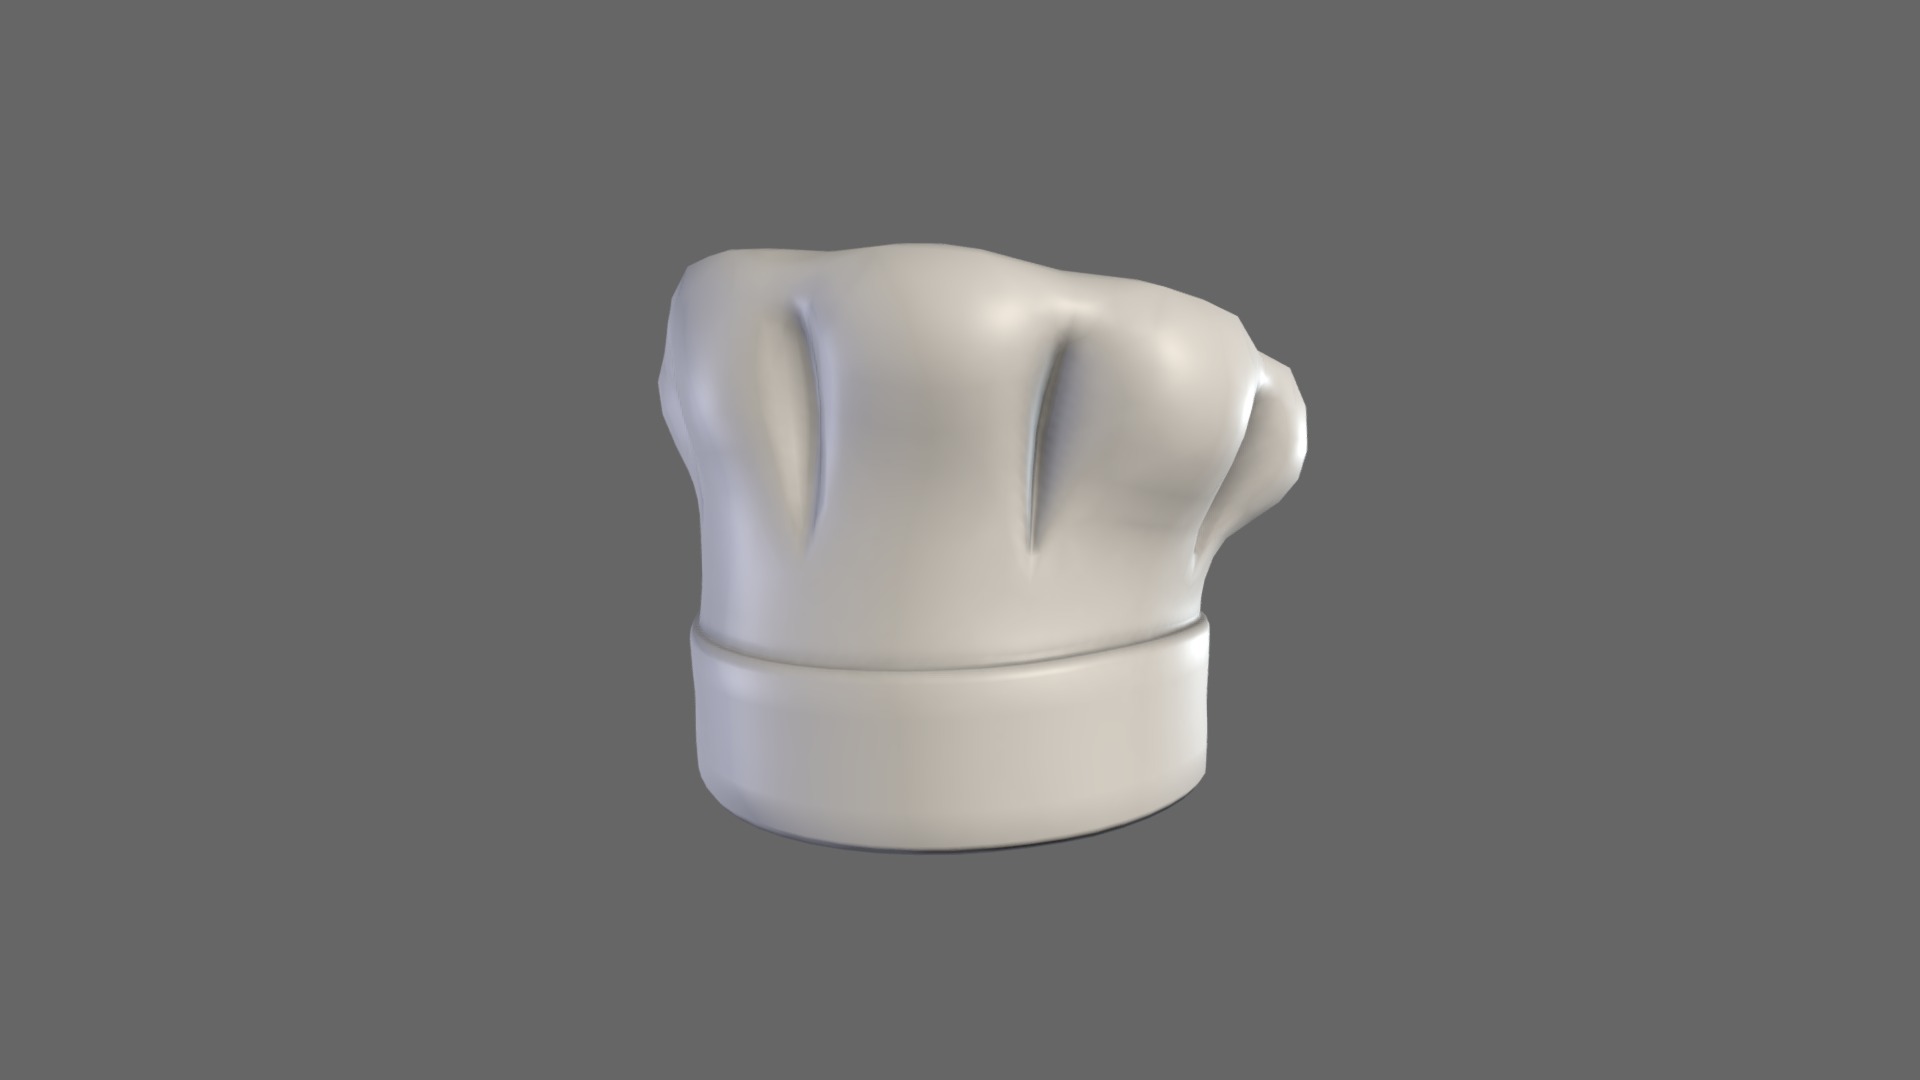 3D model Chef Hat - This is a 3D model of the Chef Hat. The 3D model is about a white ceramic cup.